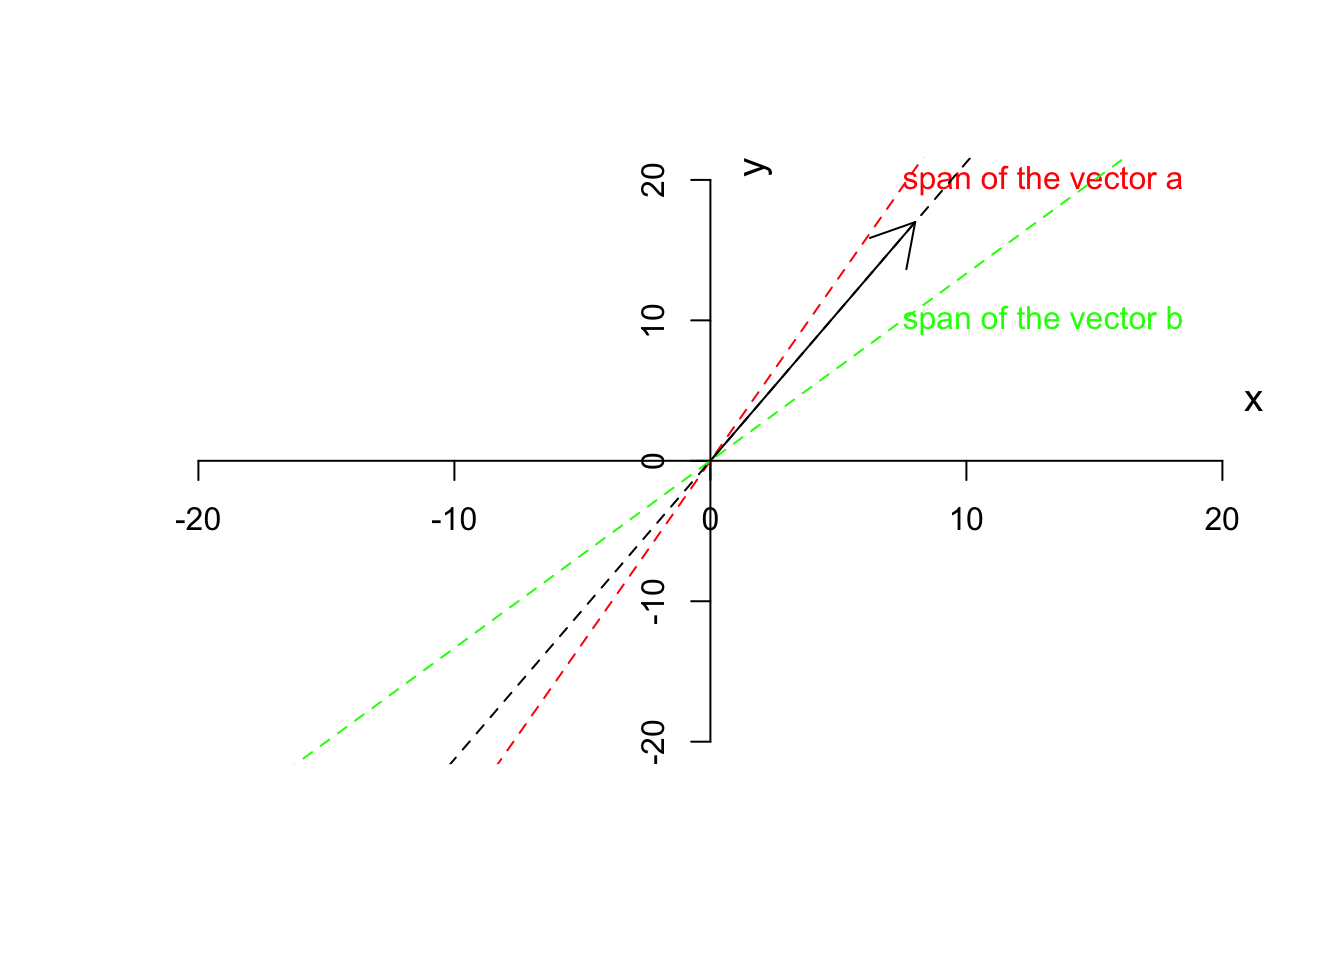 Span of vector a, b and c